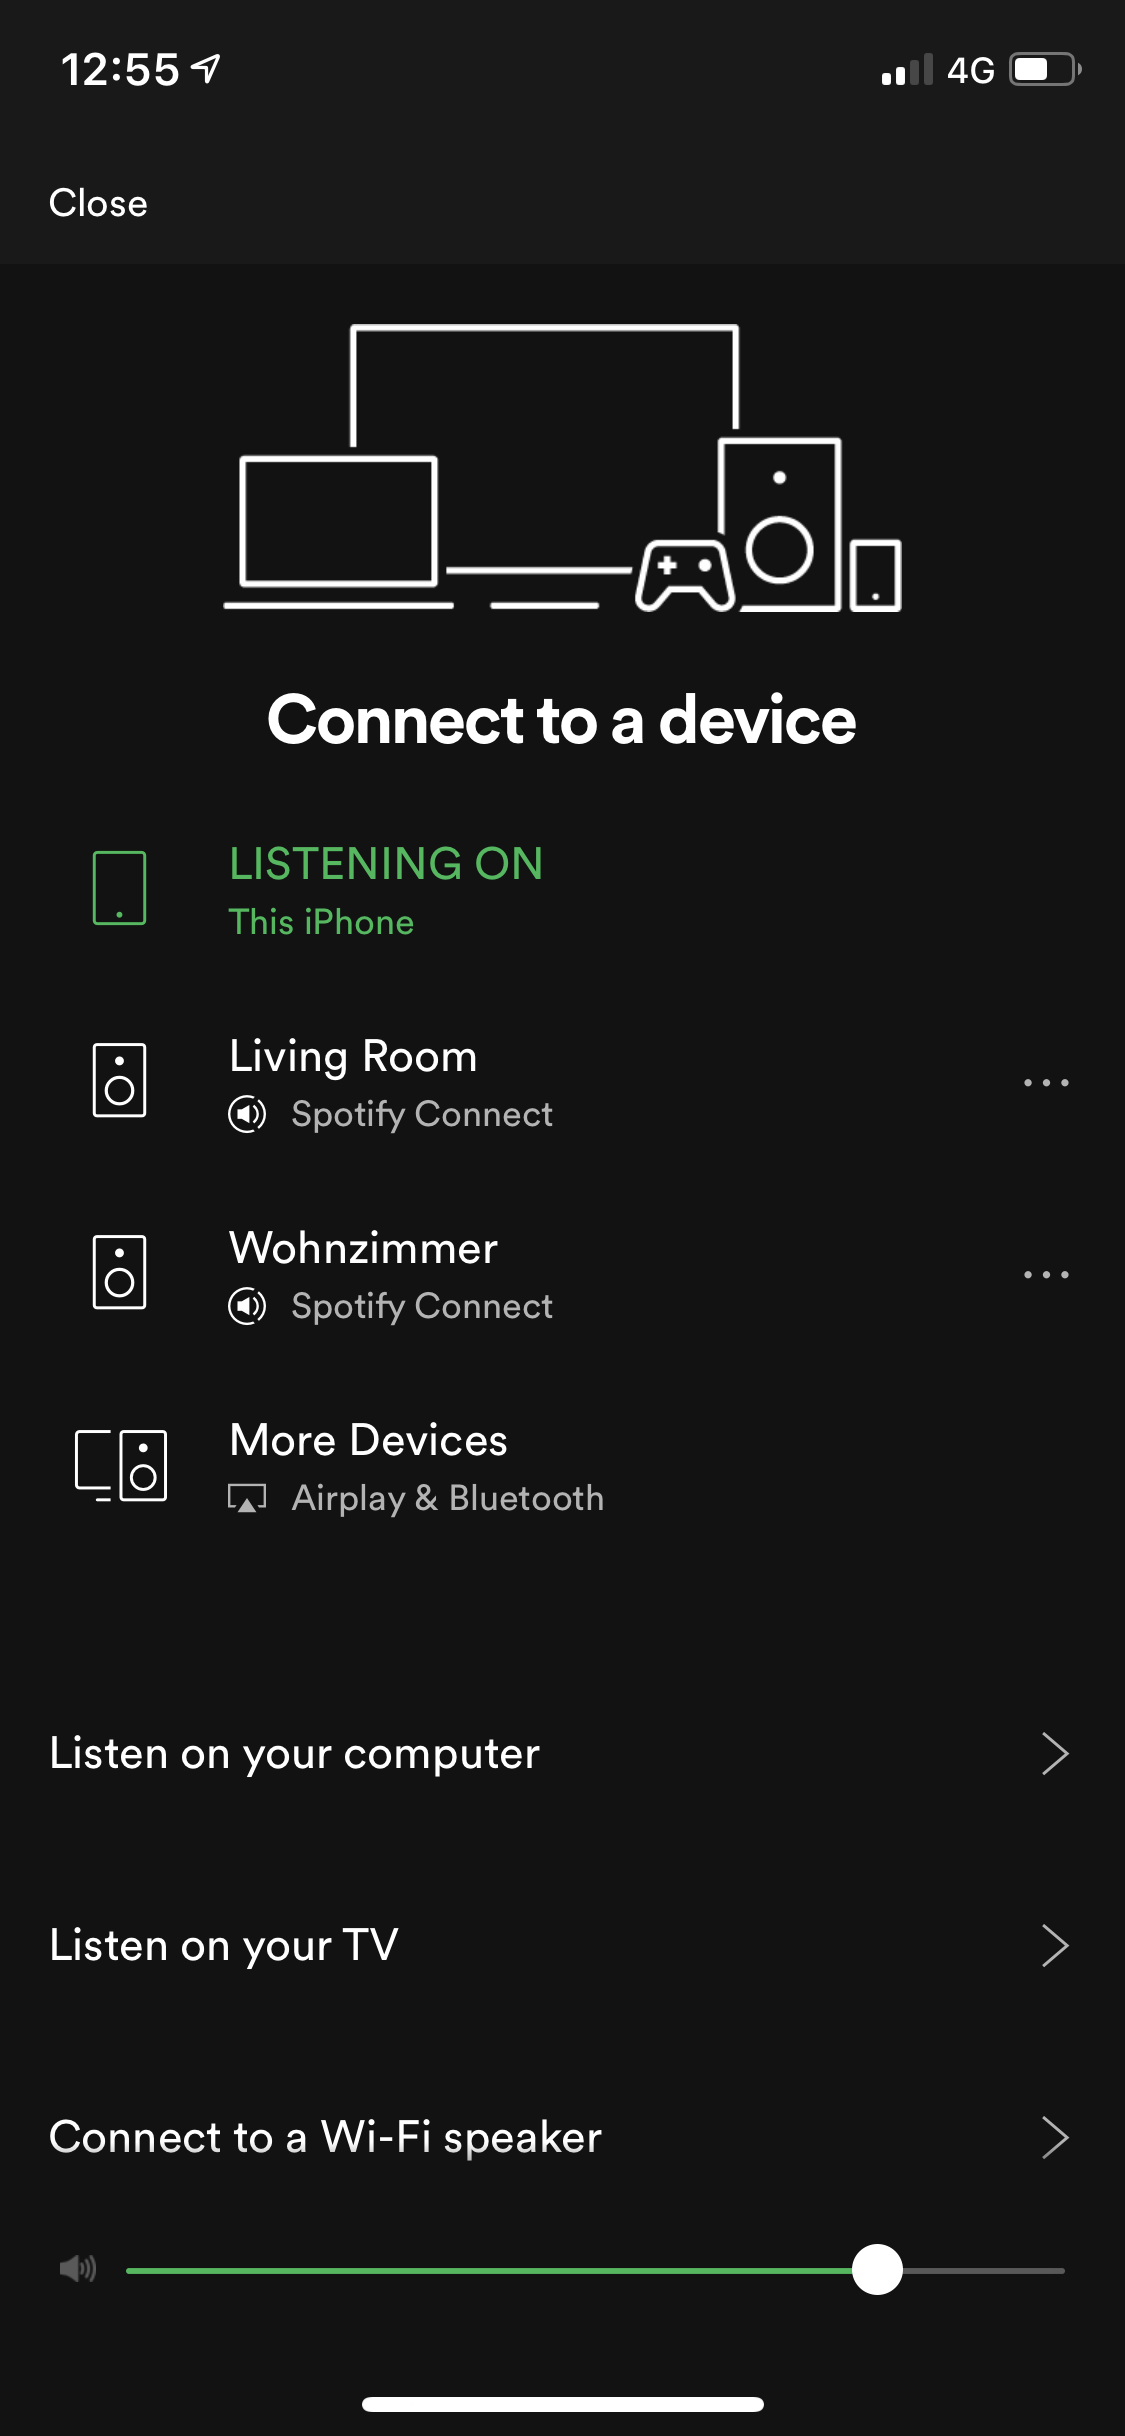 Hospital nøgen Give sonos not showing up in spotify connect | Sonos Community